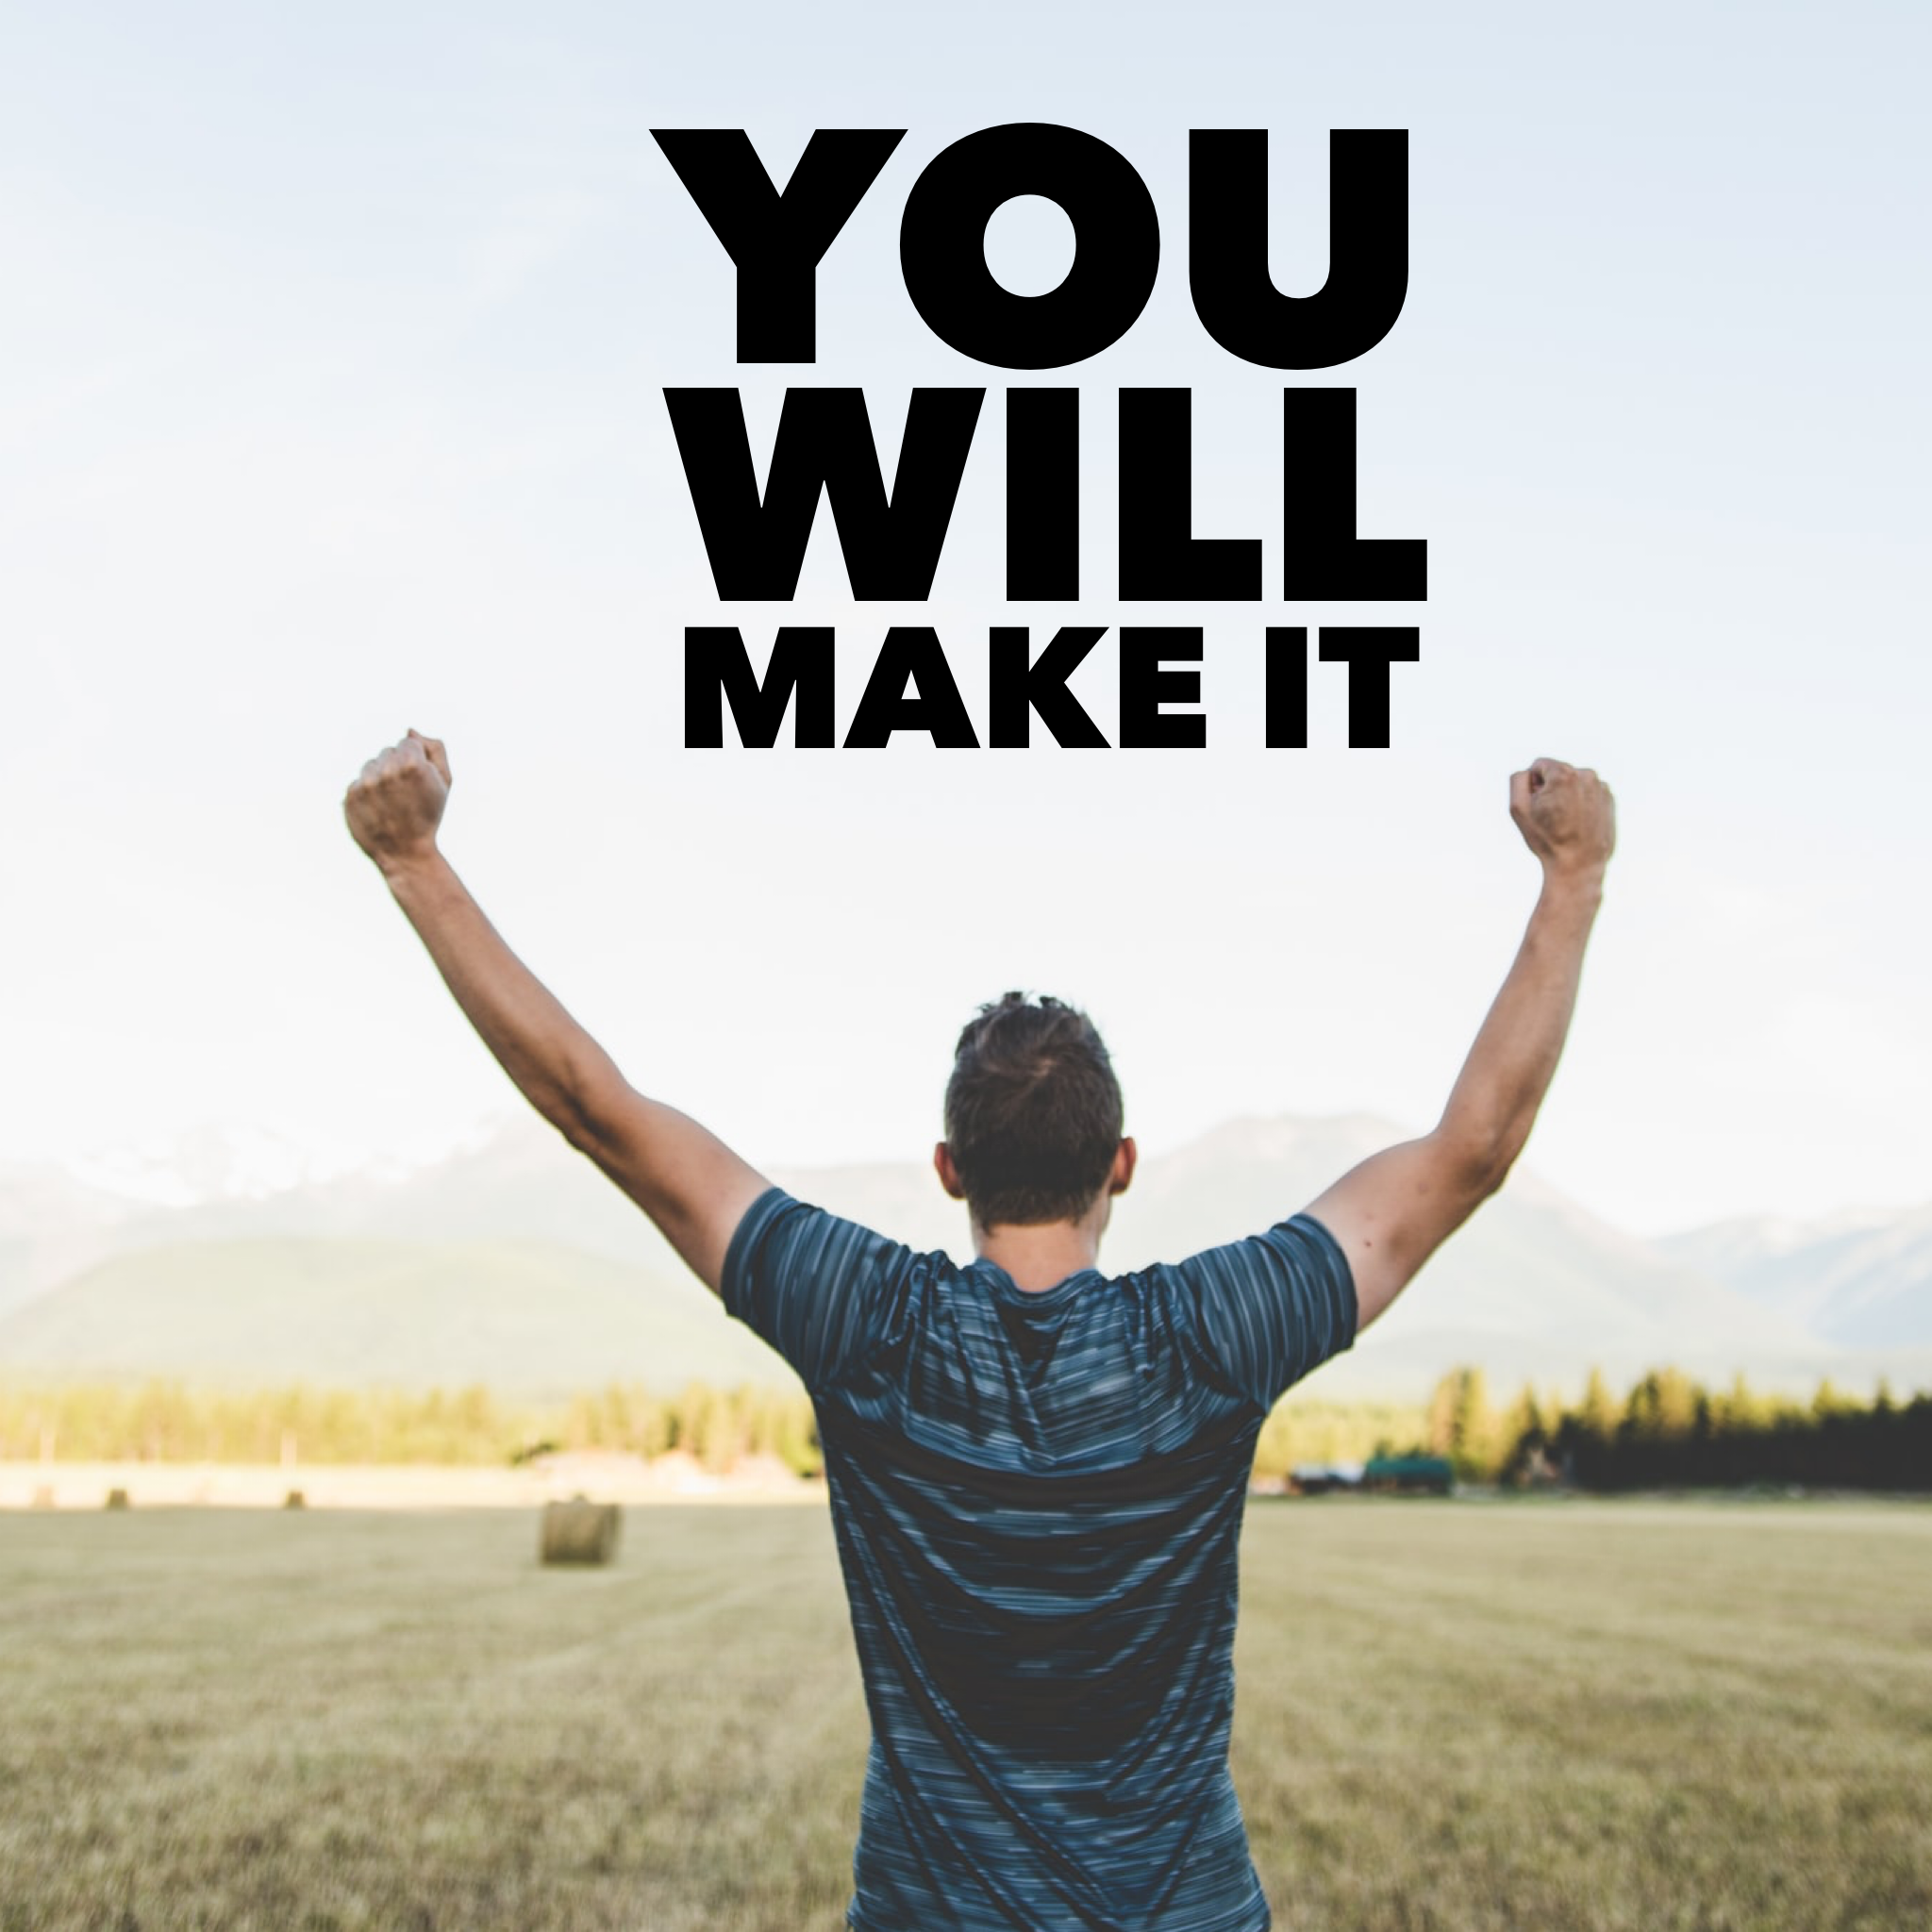 YOU WILL MAKE IT